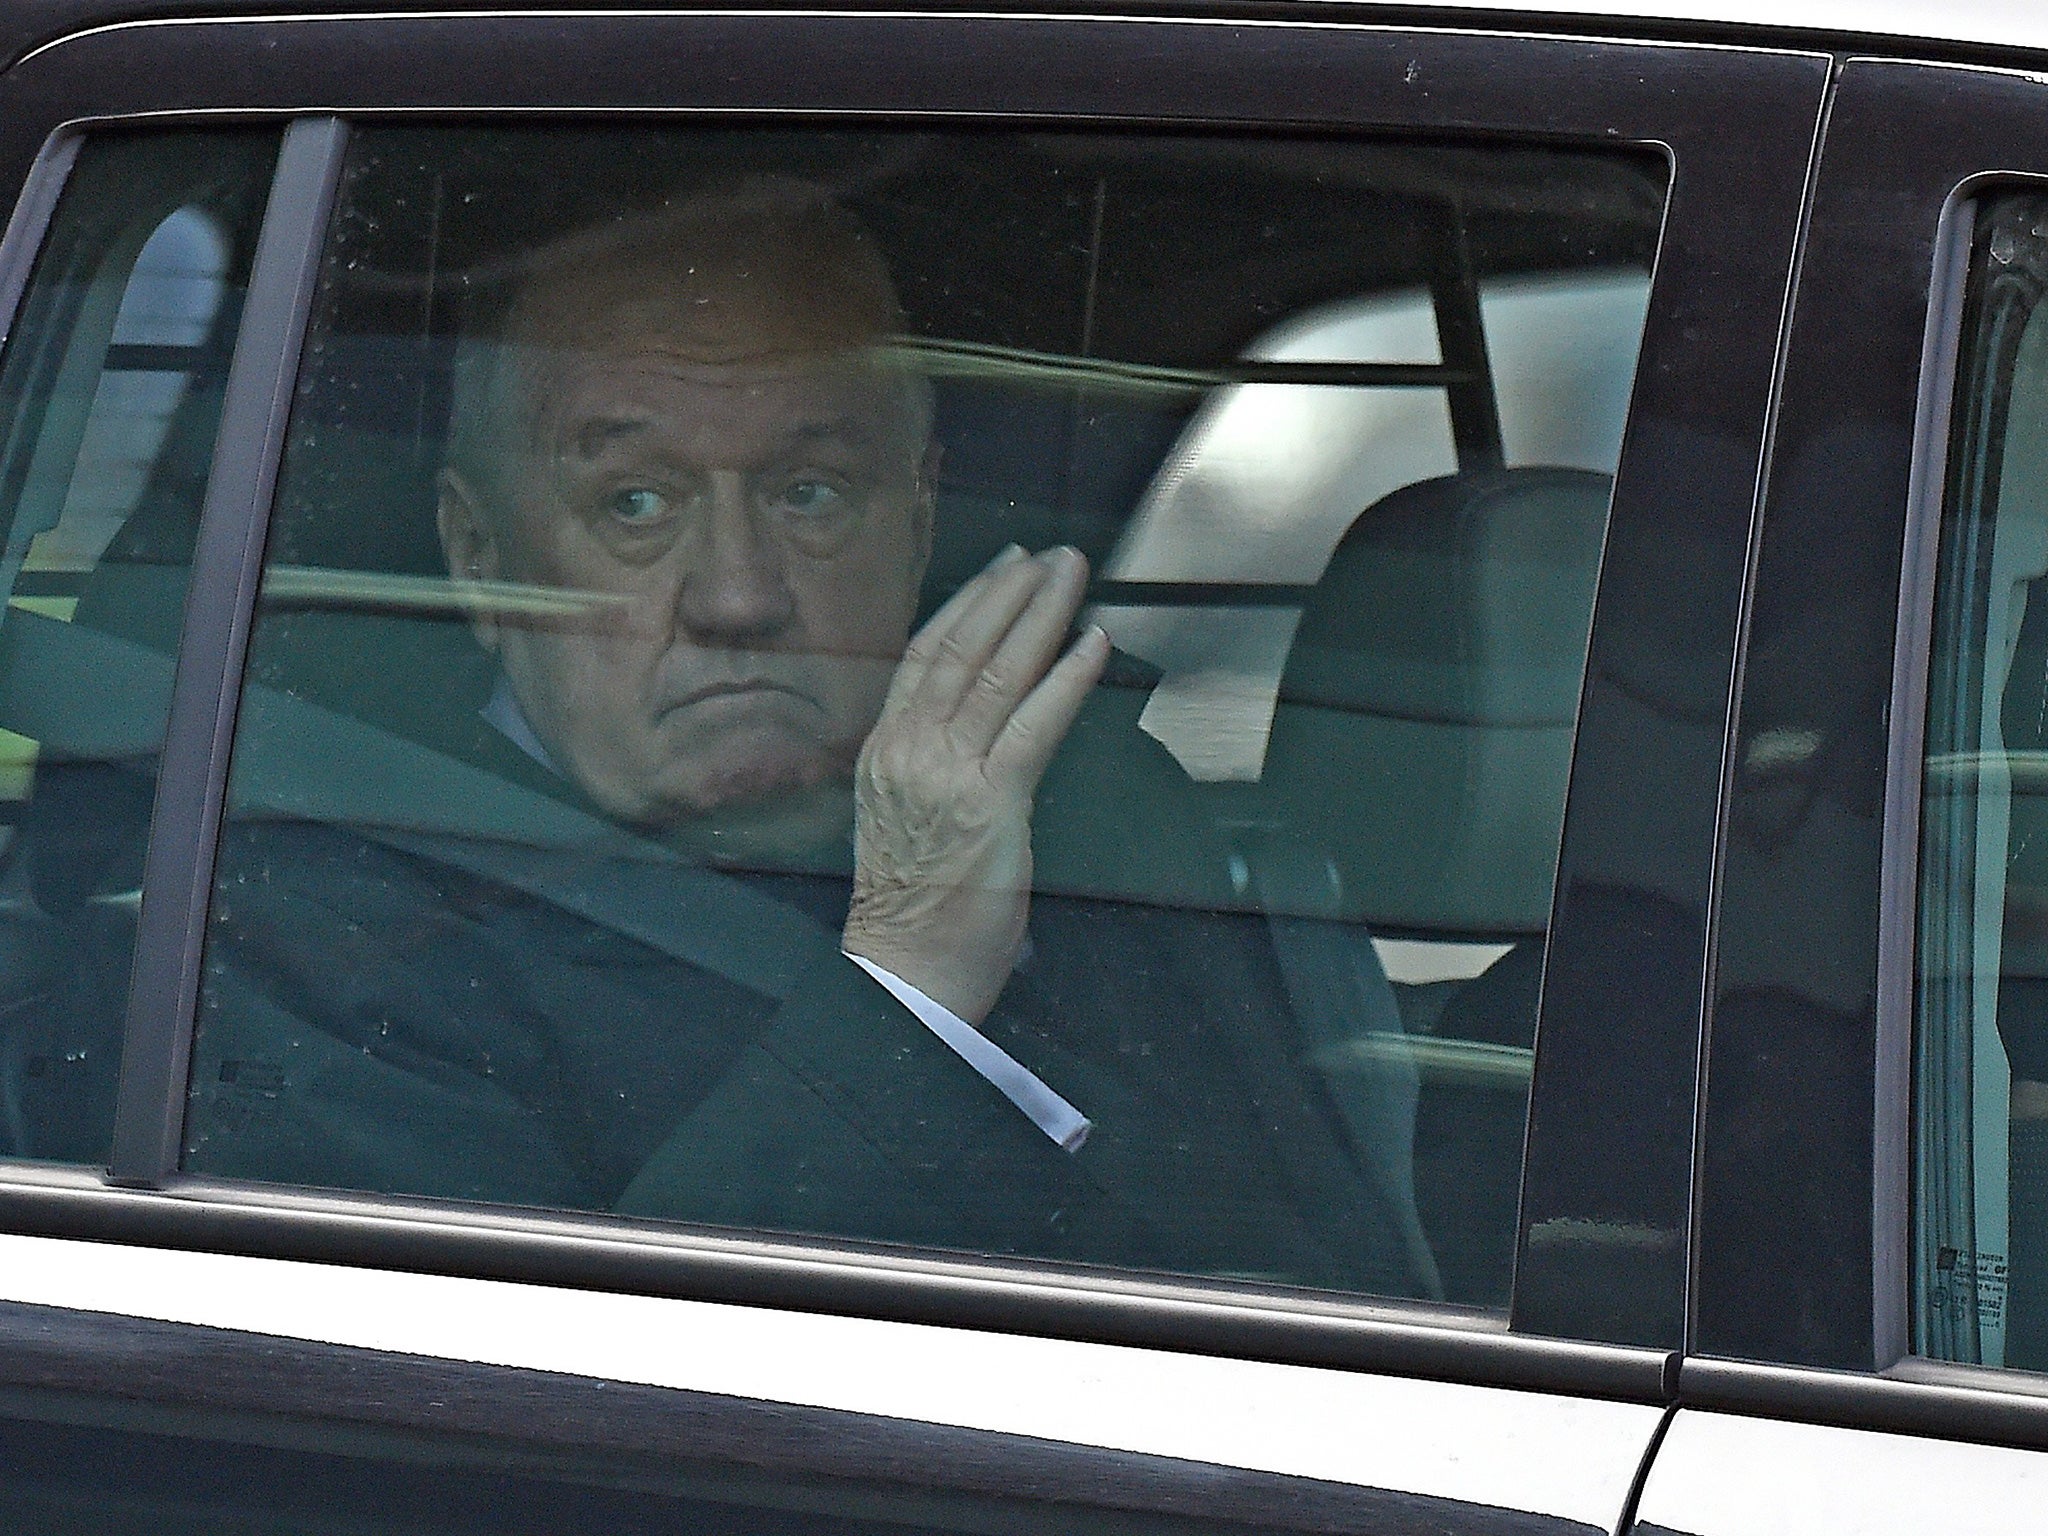 Former South Yorkshire Police chief superintendent David Duckenfield leaves the coroner’s court in Warrington